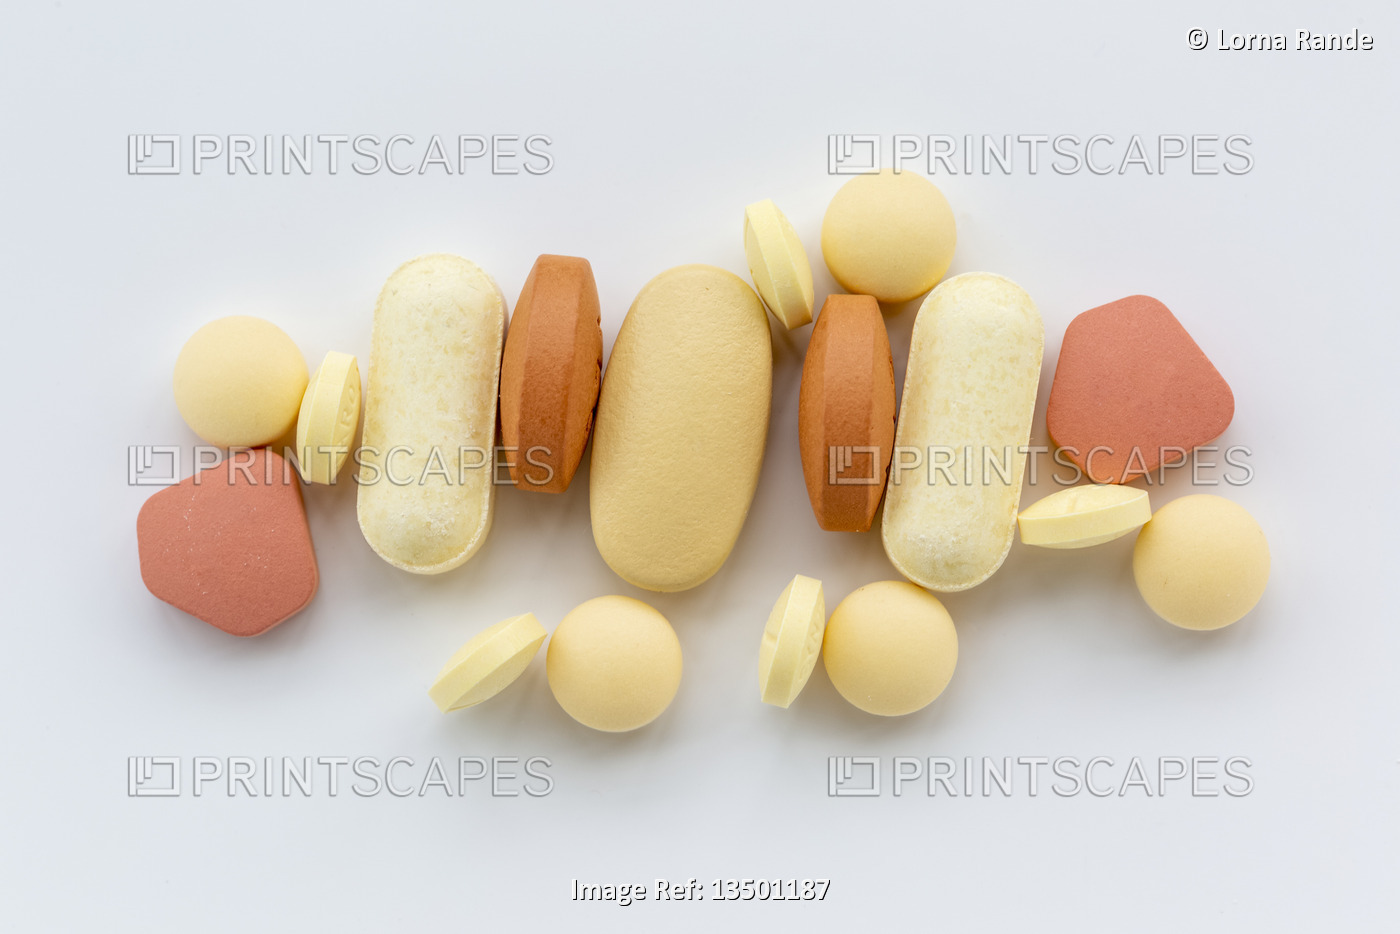 Prescription and over-the-counter pain medication; Studio